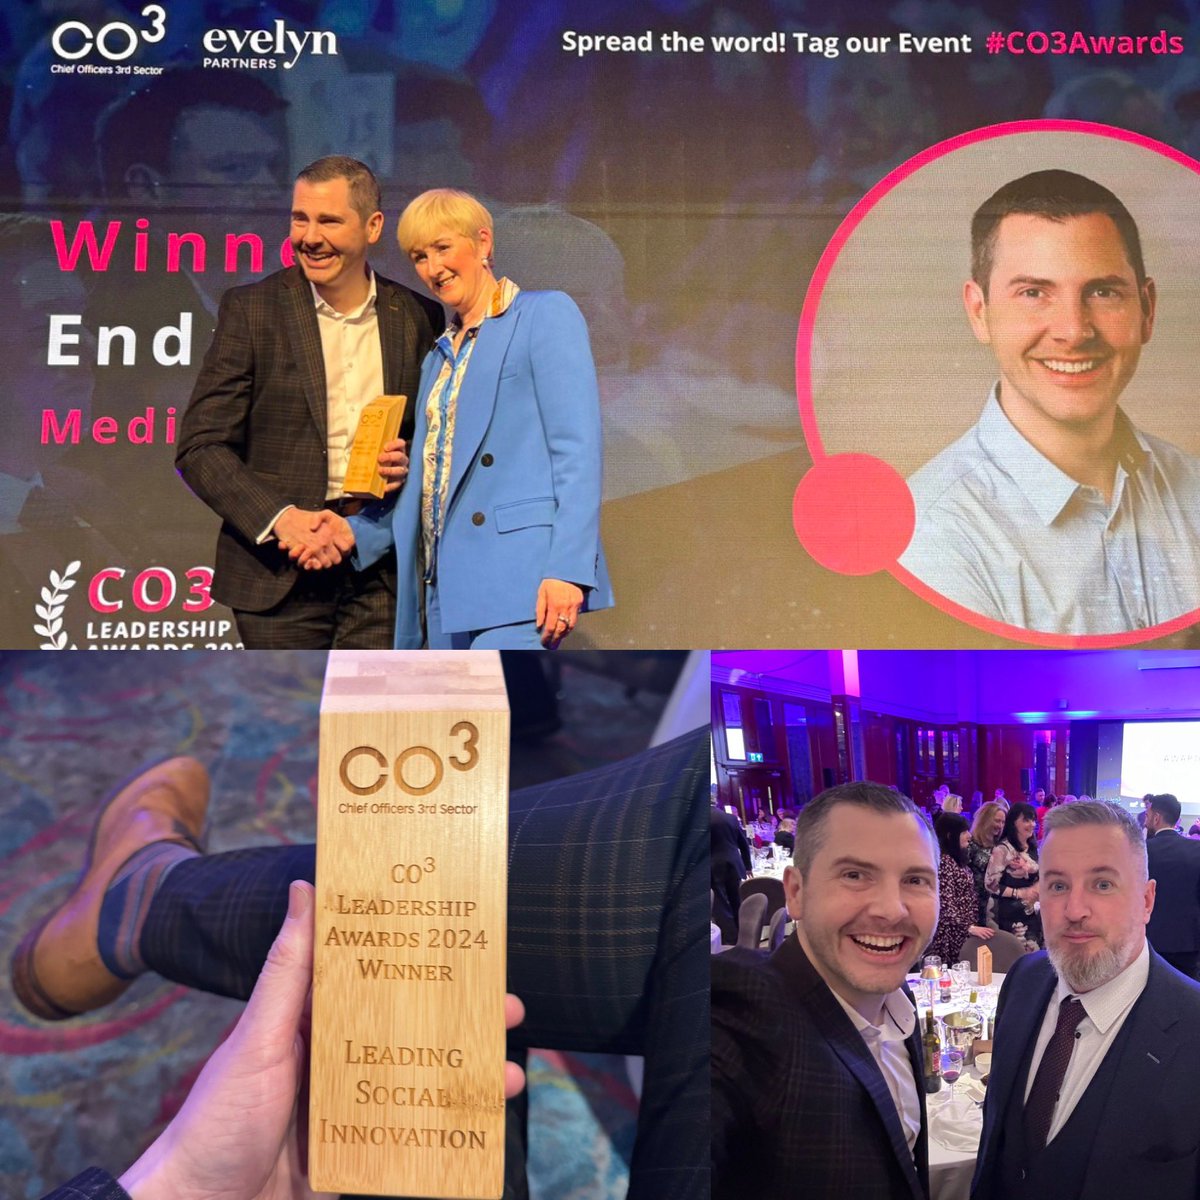 Thanks to @CO3updates for a great event at #co3awards tonight. Humbled to receive the Leading Social Innovation category award for @MediationNI Well done to @ValerieMc_CO3 @Suzcathcourt and the team for a great event!